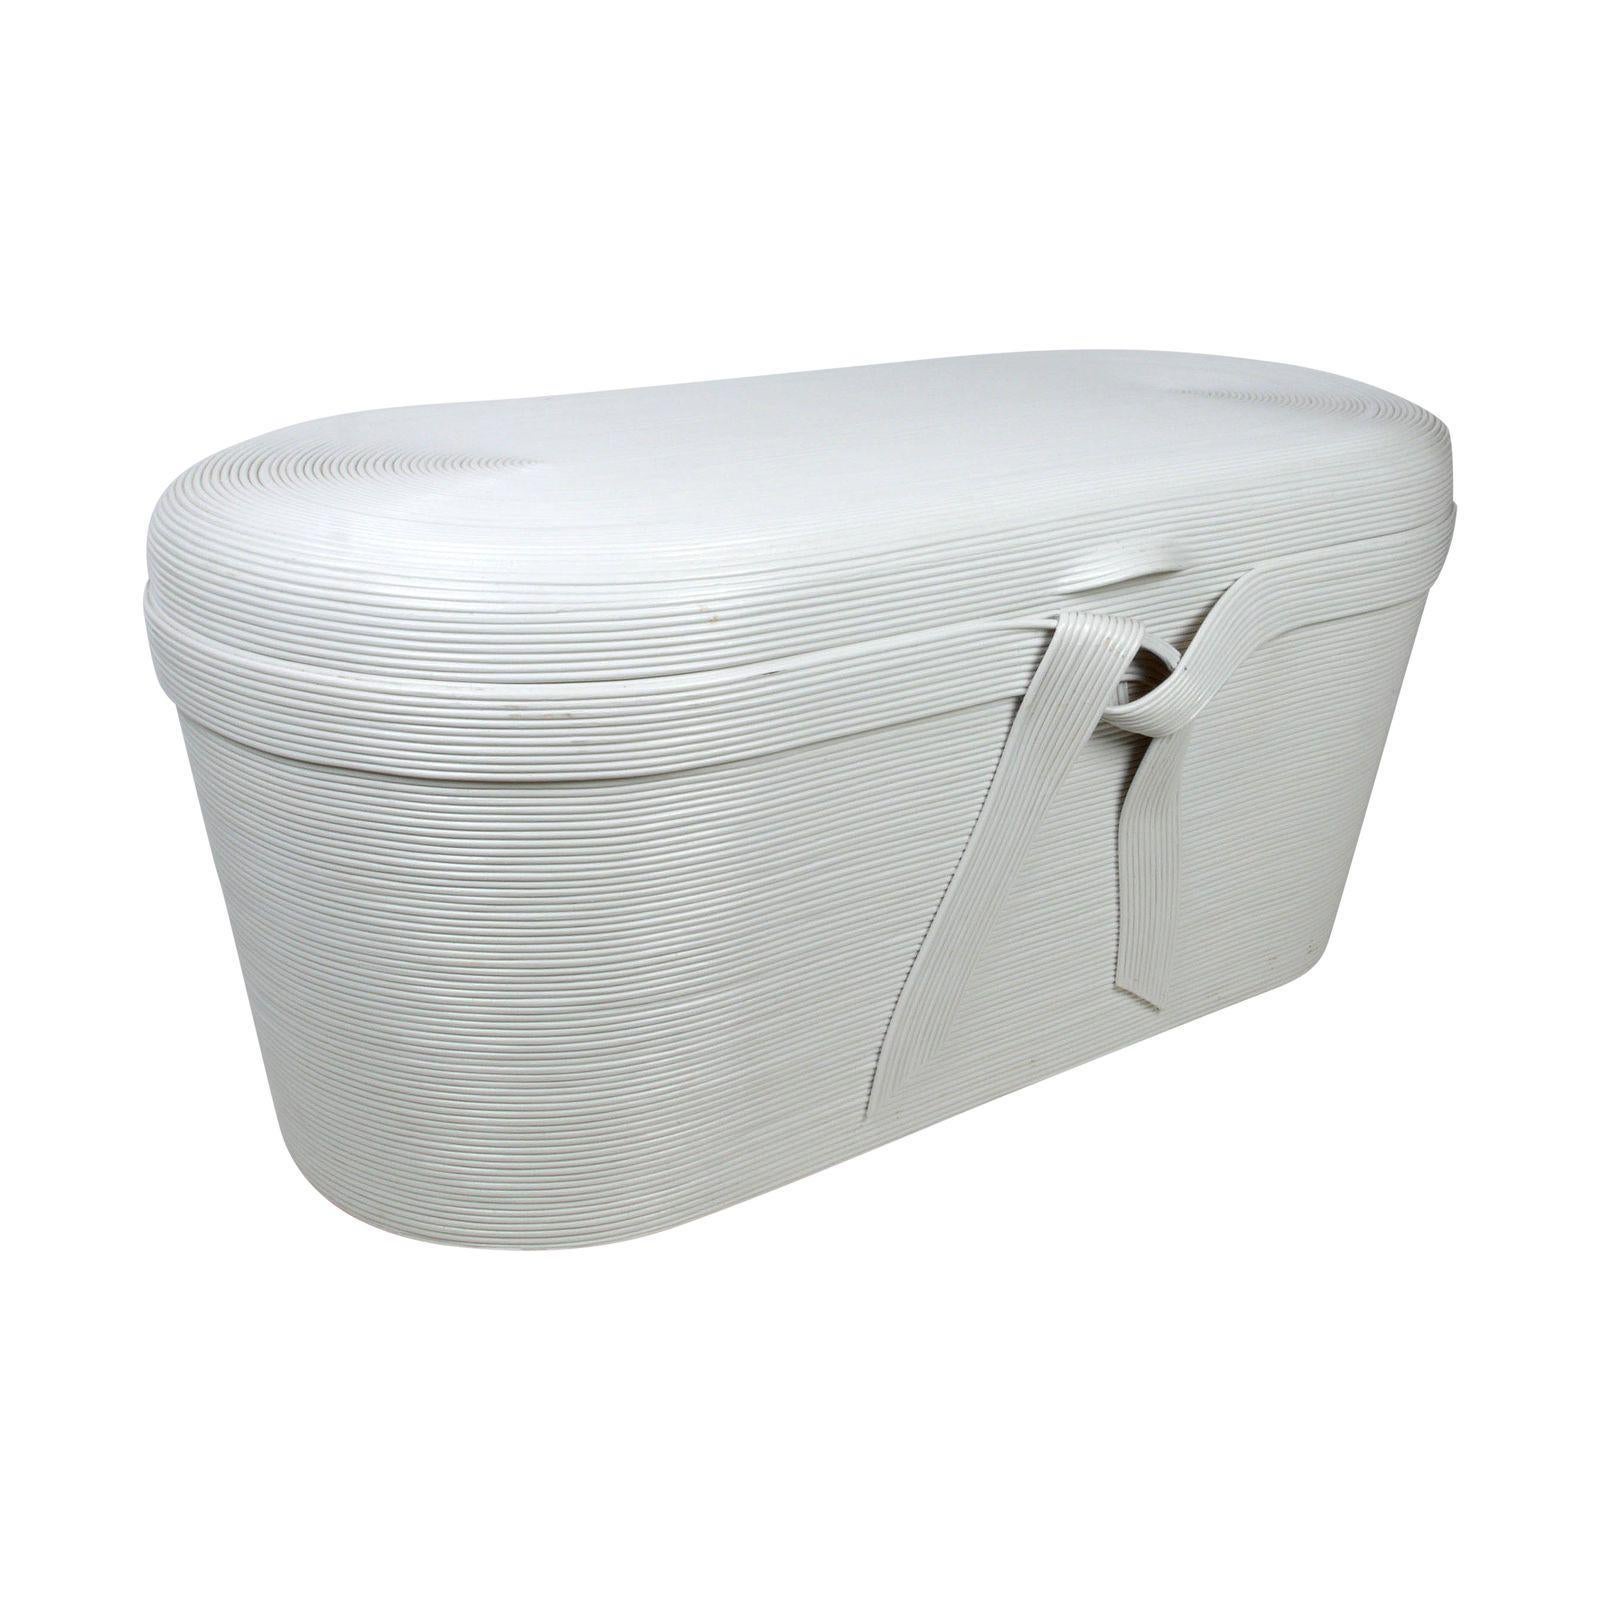 Bamboo and wood blanket chest 
Lacquered in white.
Light wear to the finish inside.